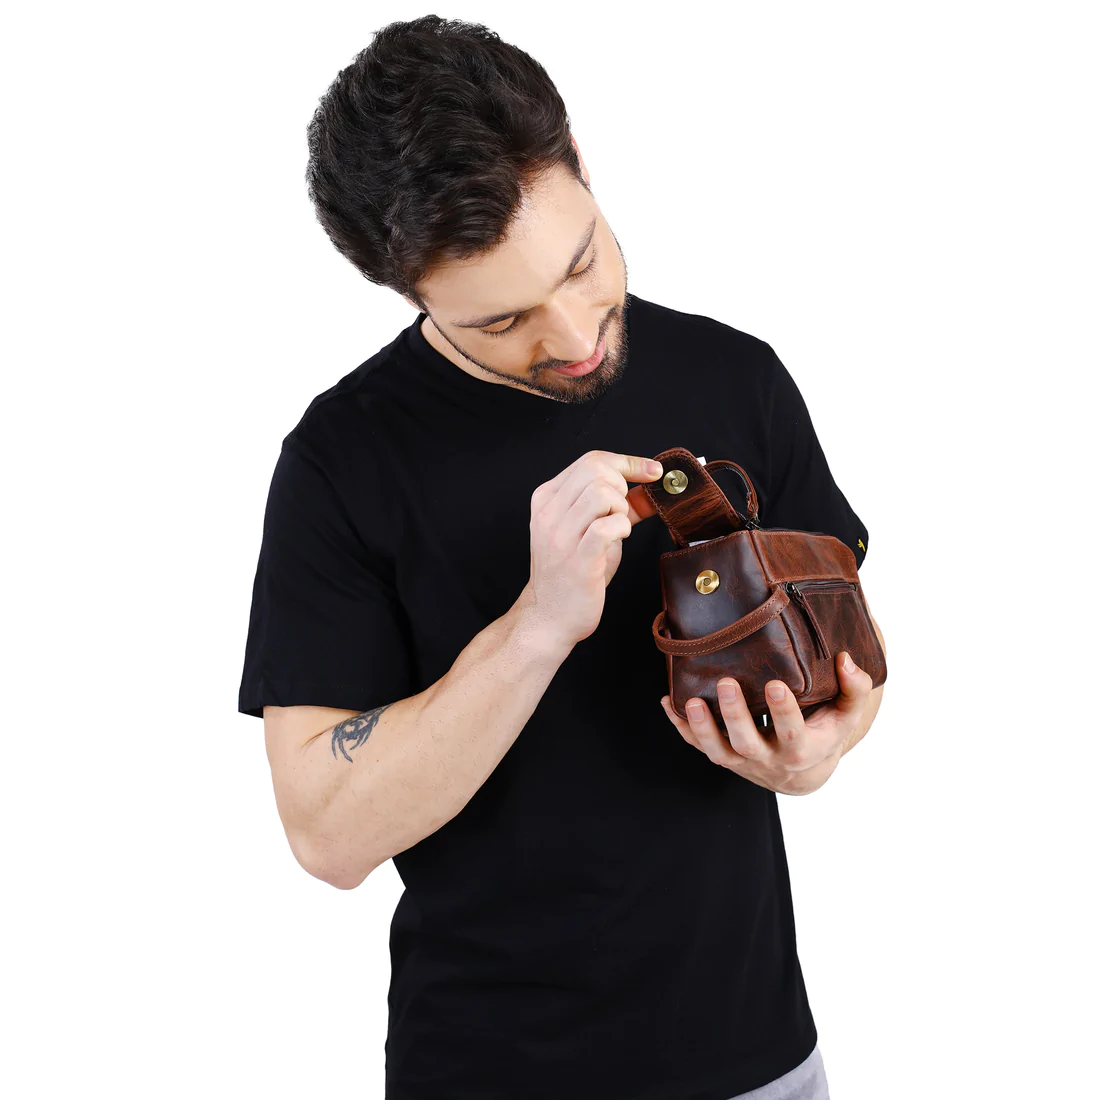 Load image into Gallery viewer, Leather Toiletry Multi zipper Bag | Dark Brown
